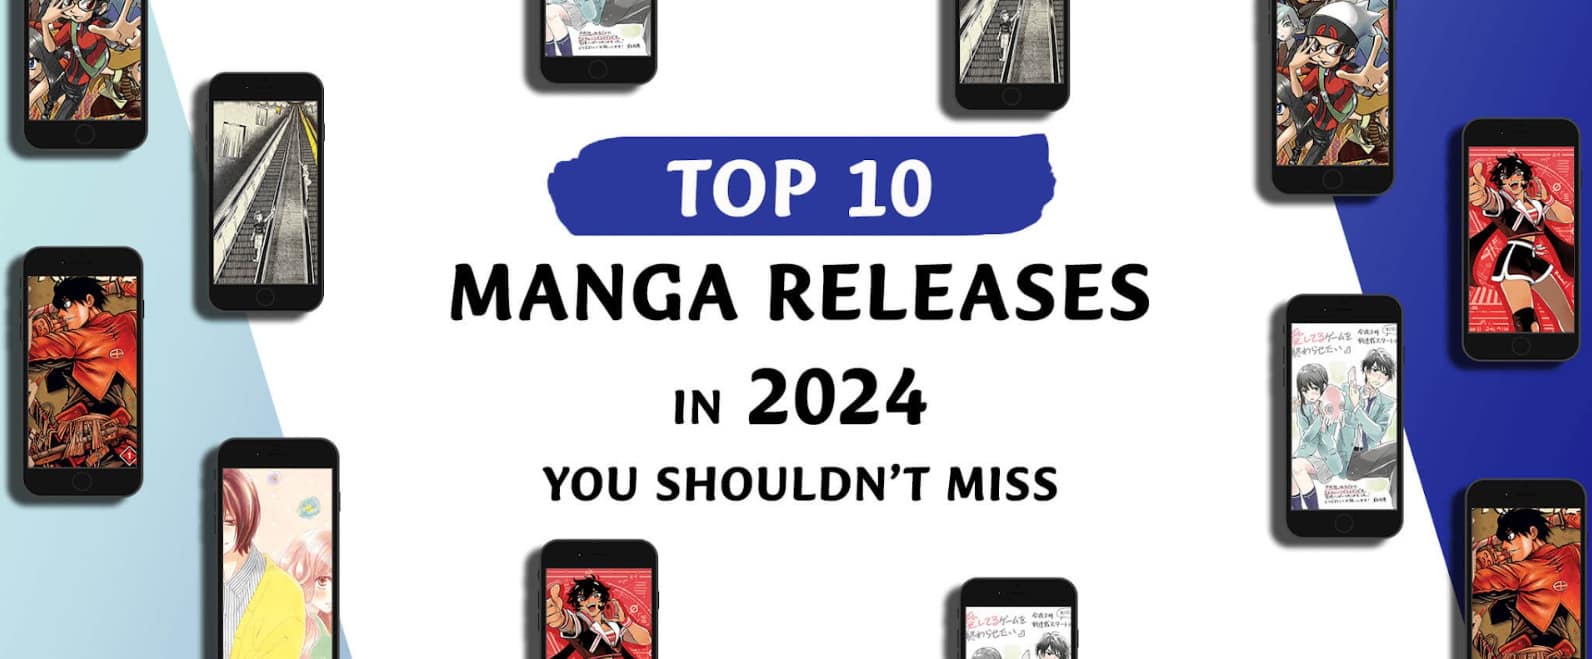 Top 10 Manga Releases in 2024 You Shouldn’t Miss